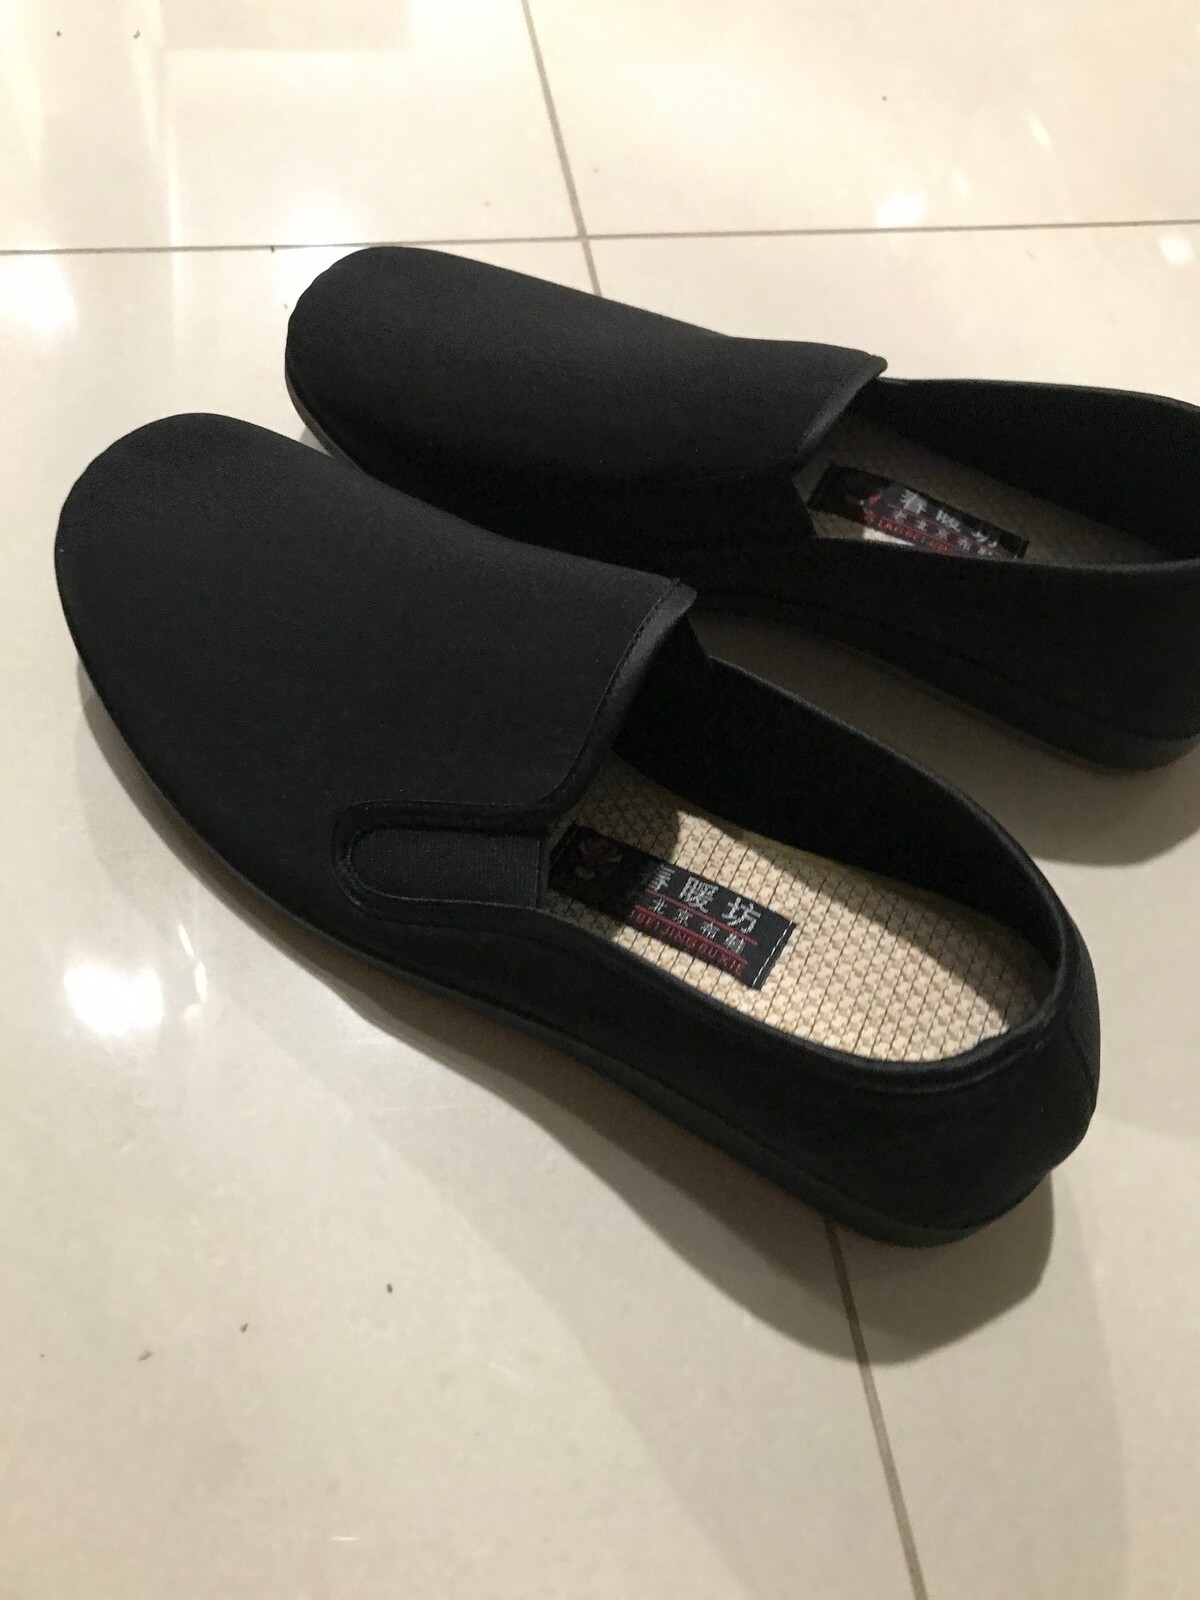 CSG Deluxe Kung Fu Slippers - 44 Europe